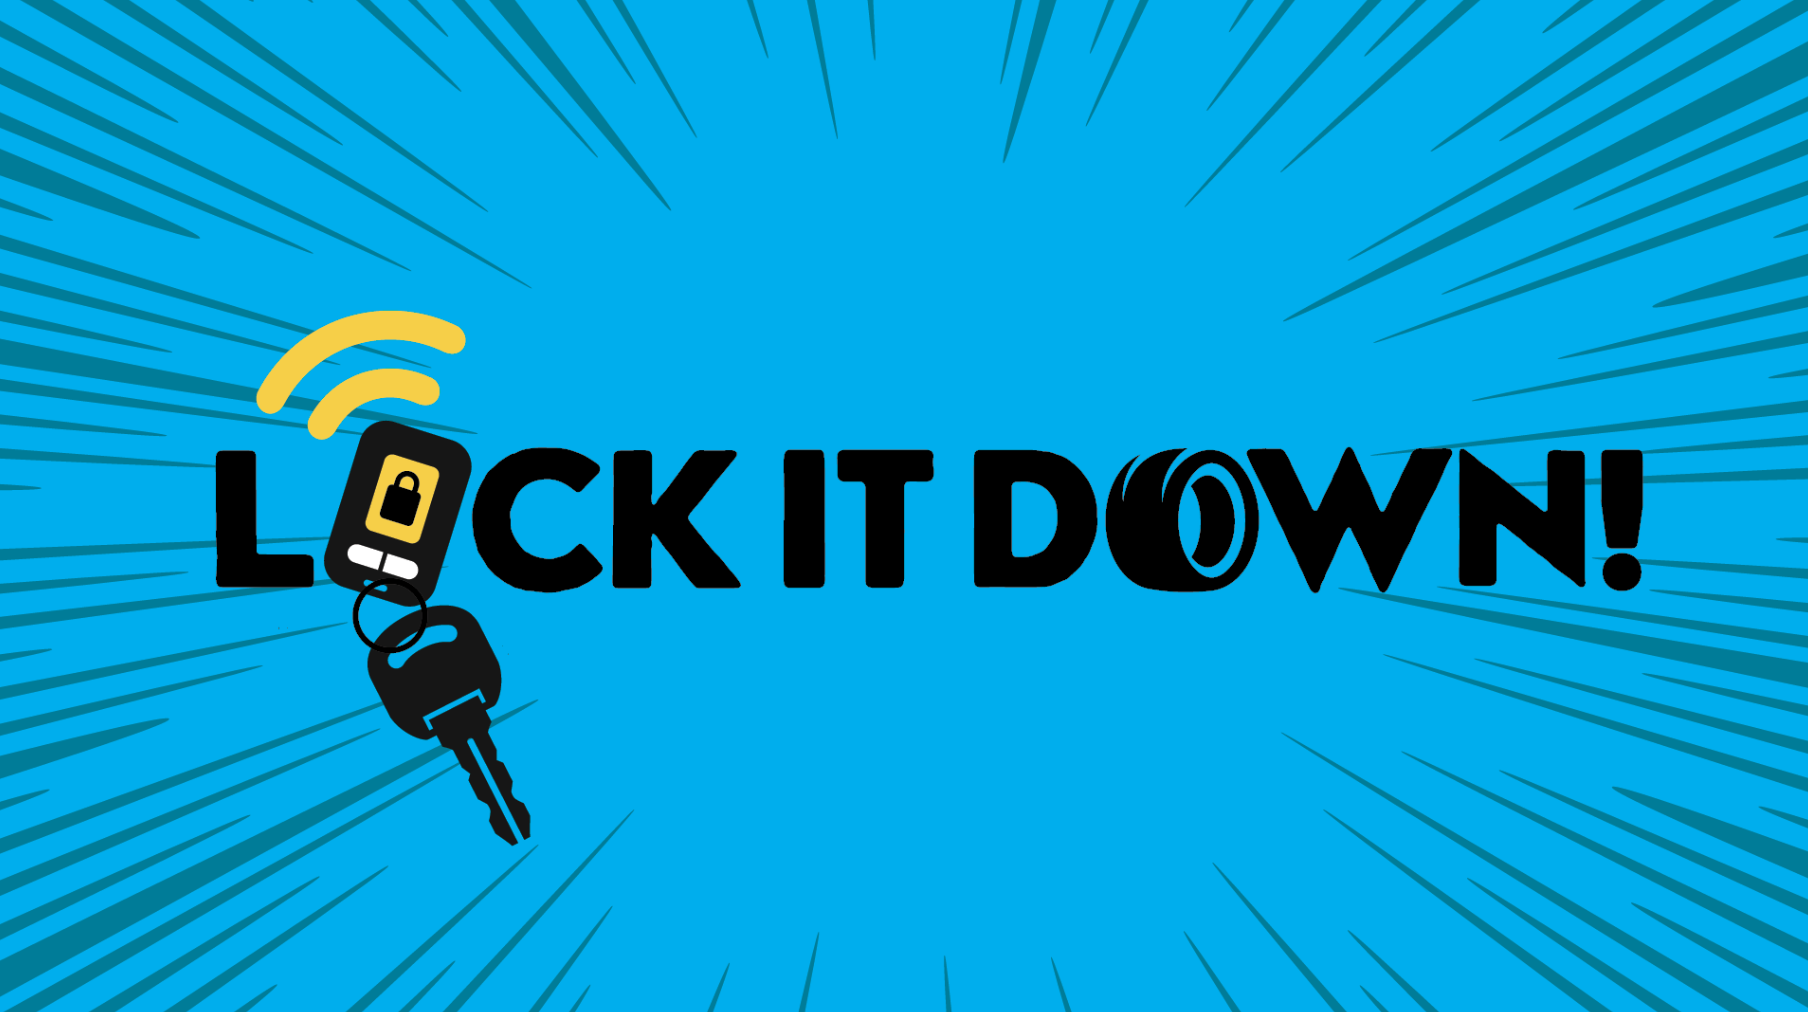 Lock It Down graphic courtesy of MVCPA and Insurance Council of Texas.